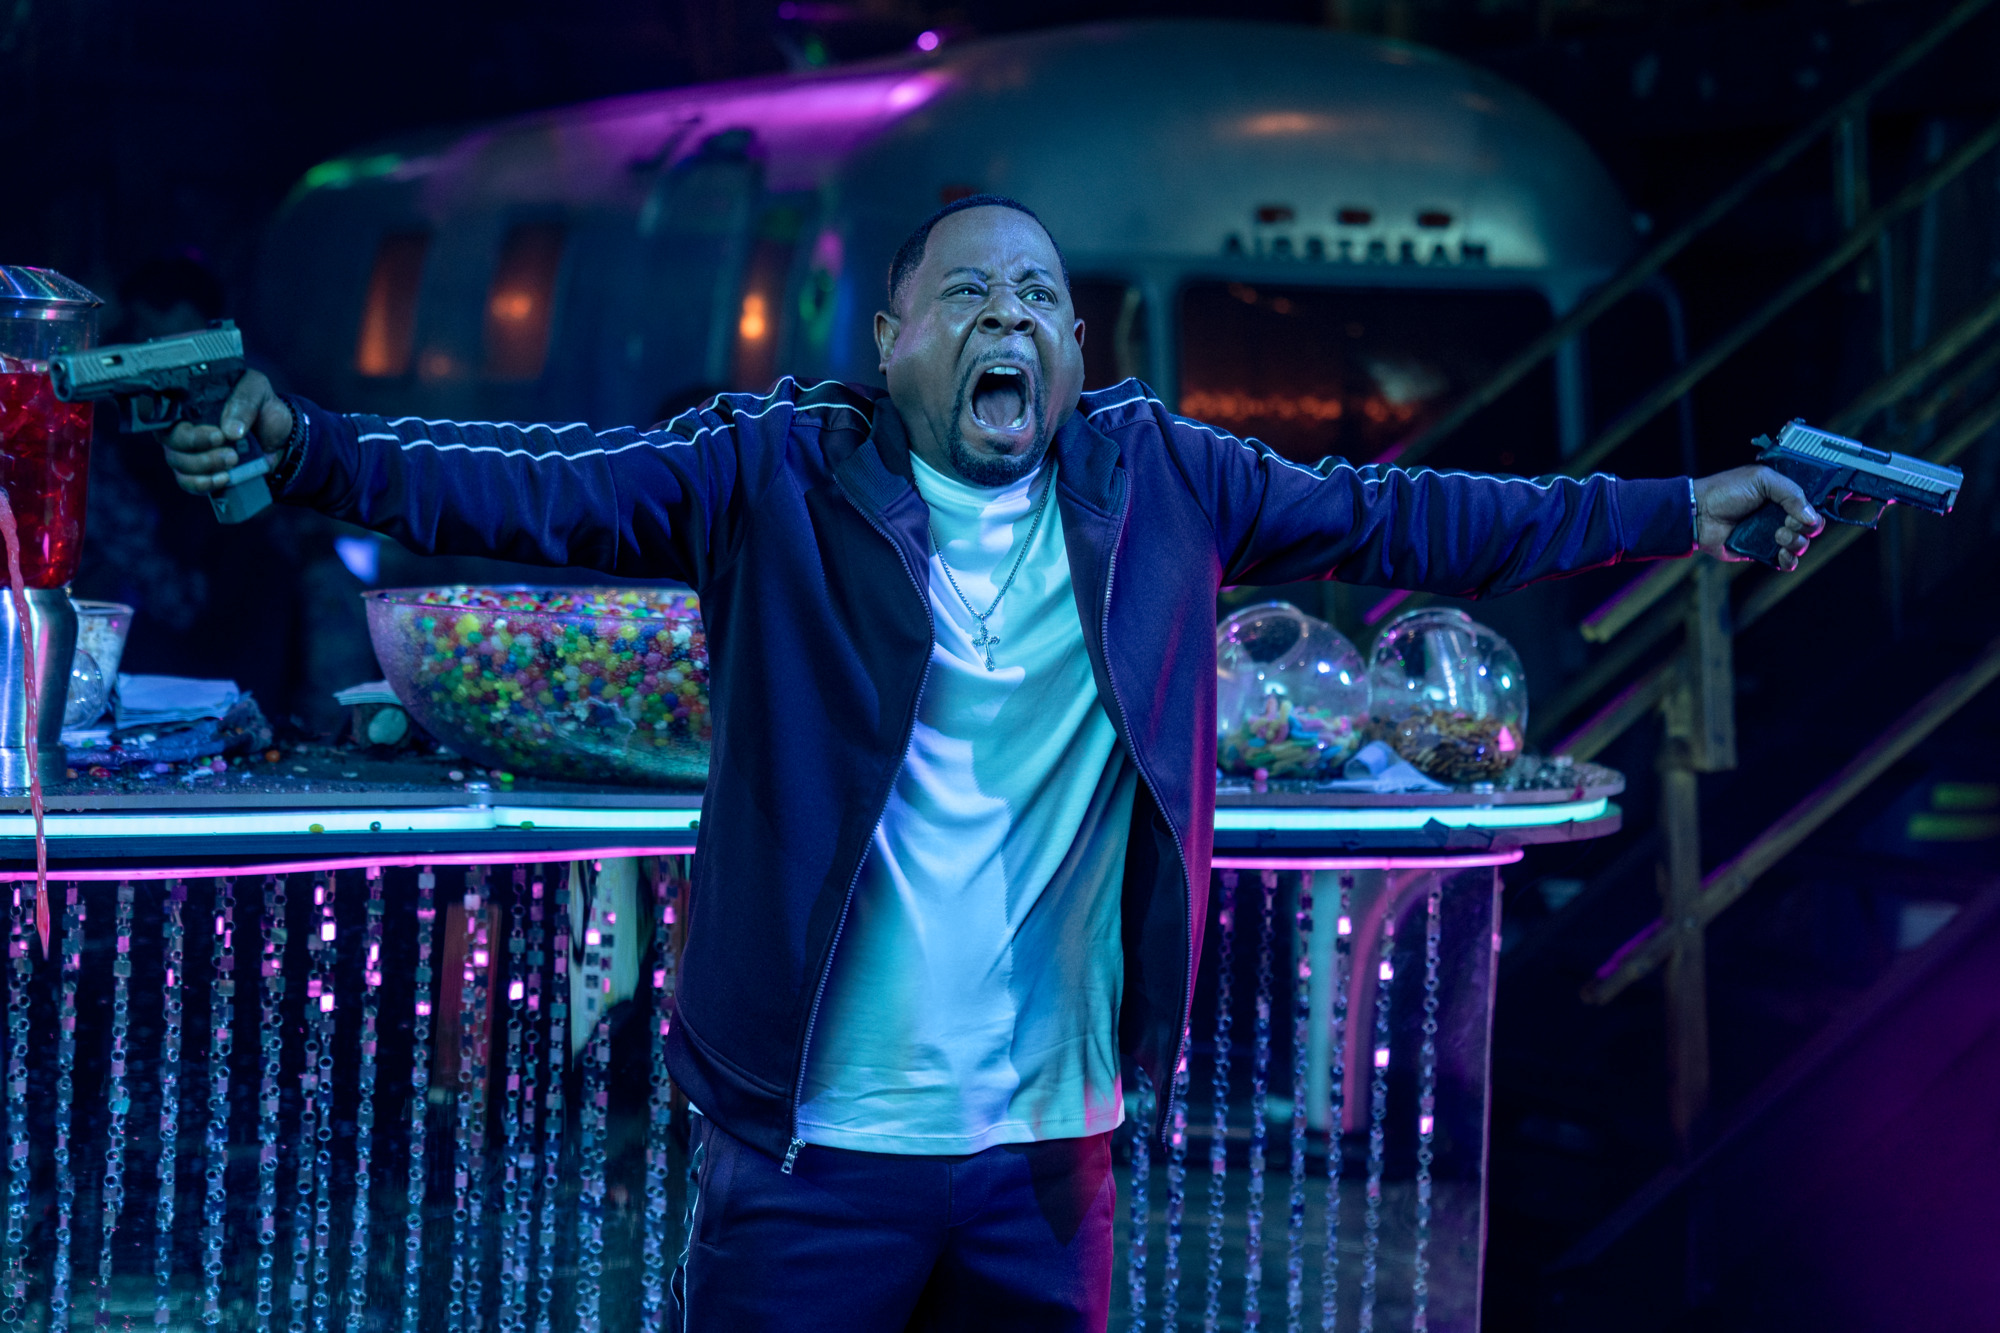 Martin Lawrence as Marcus Burnett yelling as he wields two guns in the club in Bad Boys: Ride or Die